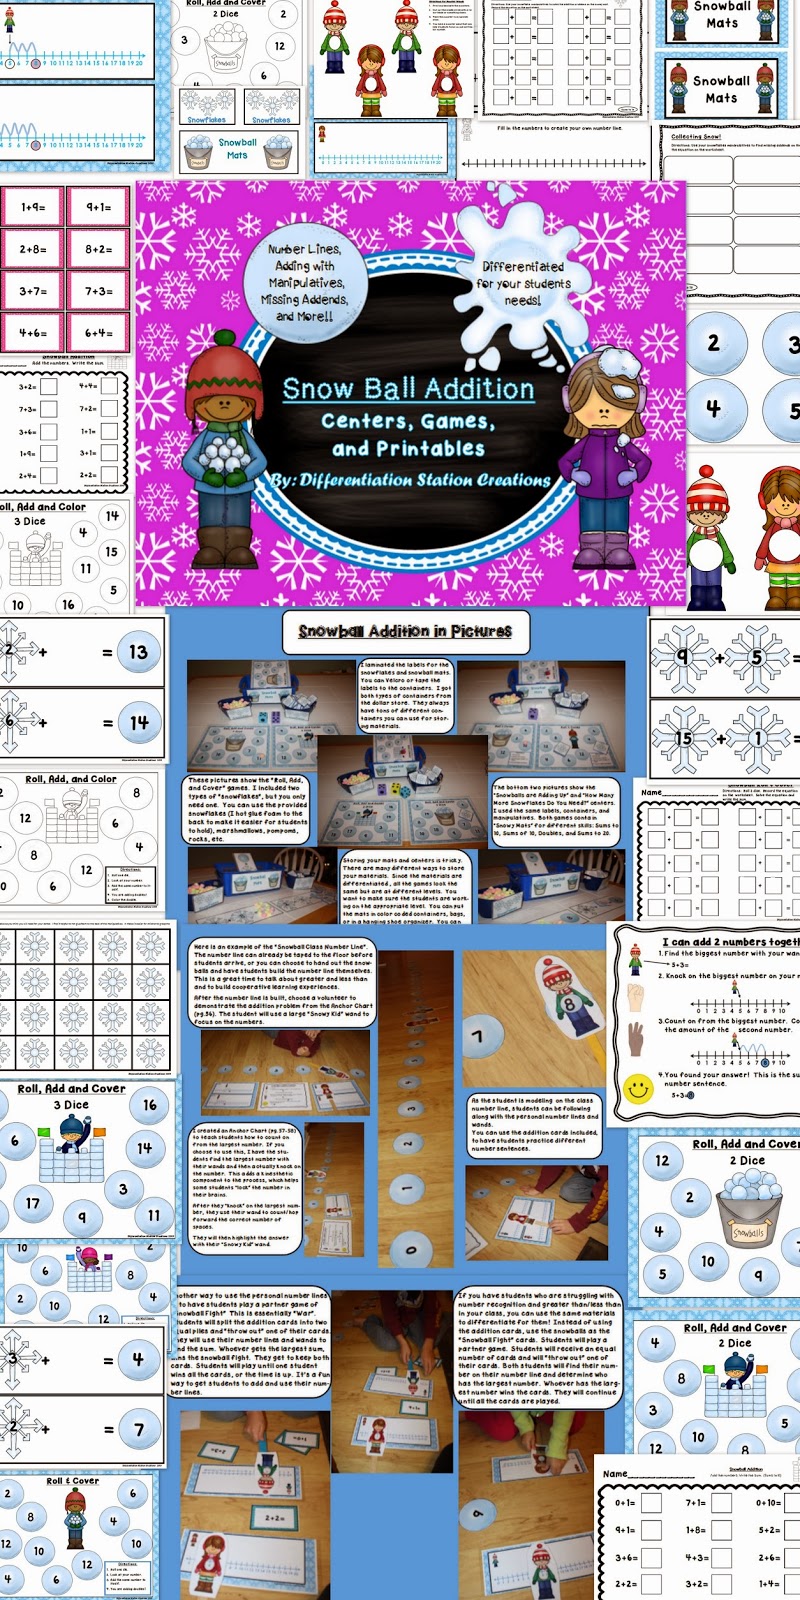 http://www.teacherspayteachers.com/Product/Snowball-Addition-Addition-to-20-Number-Lines-Missing-Addends-Common-Core-1018066